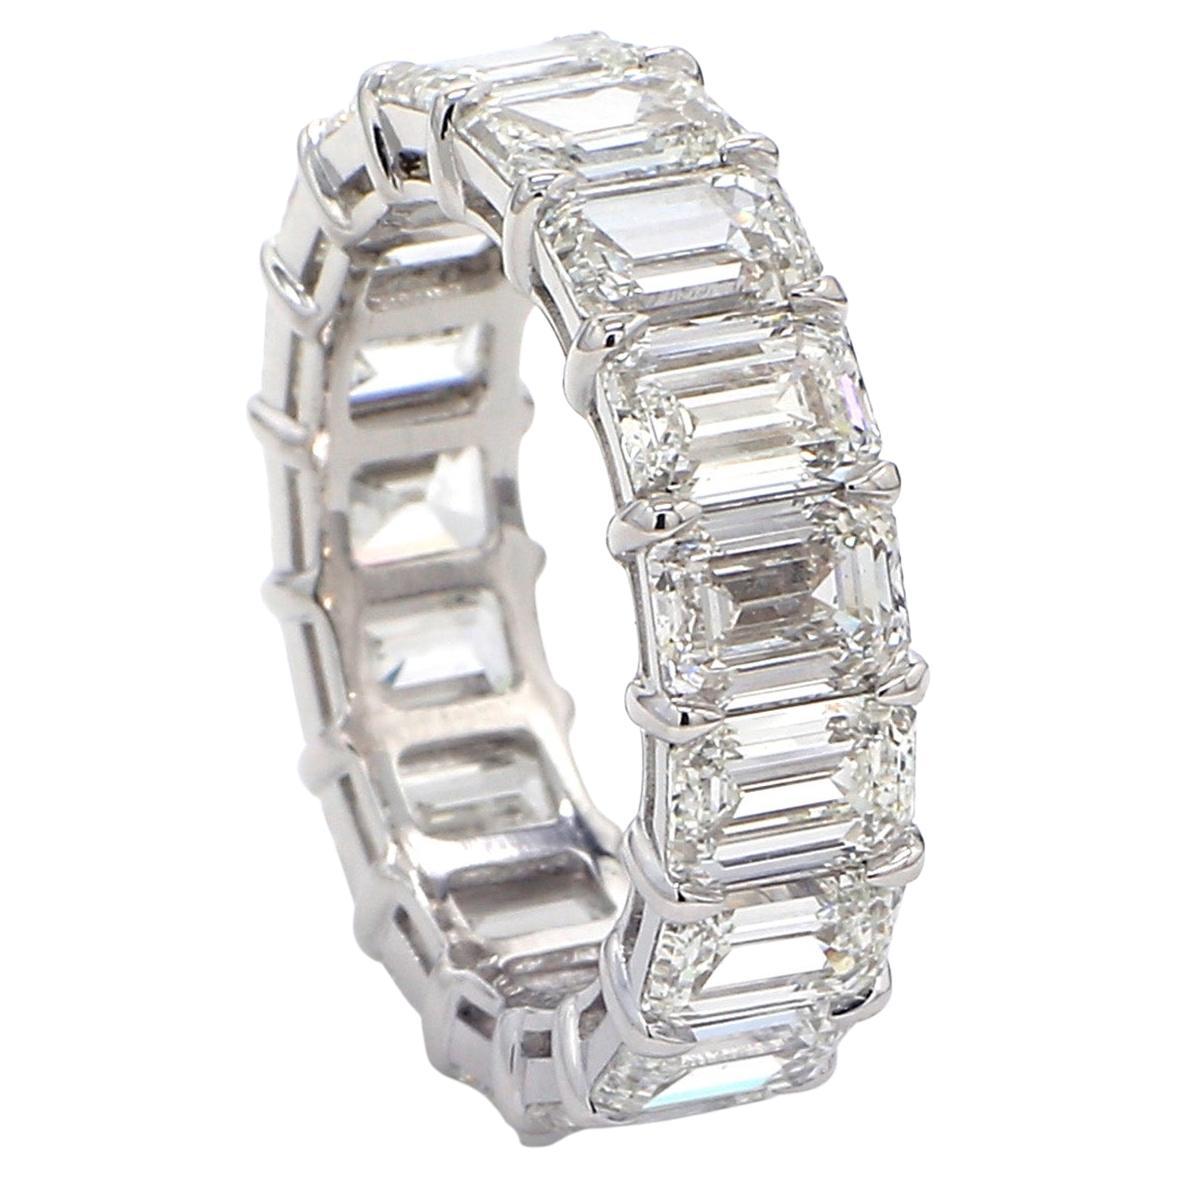 Eternity Band in Platinum with GIA G-H/VVS2-VS2 Emerald Cut Diamonds. D8.57ct. For Sale